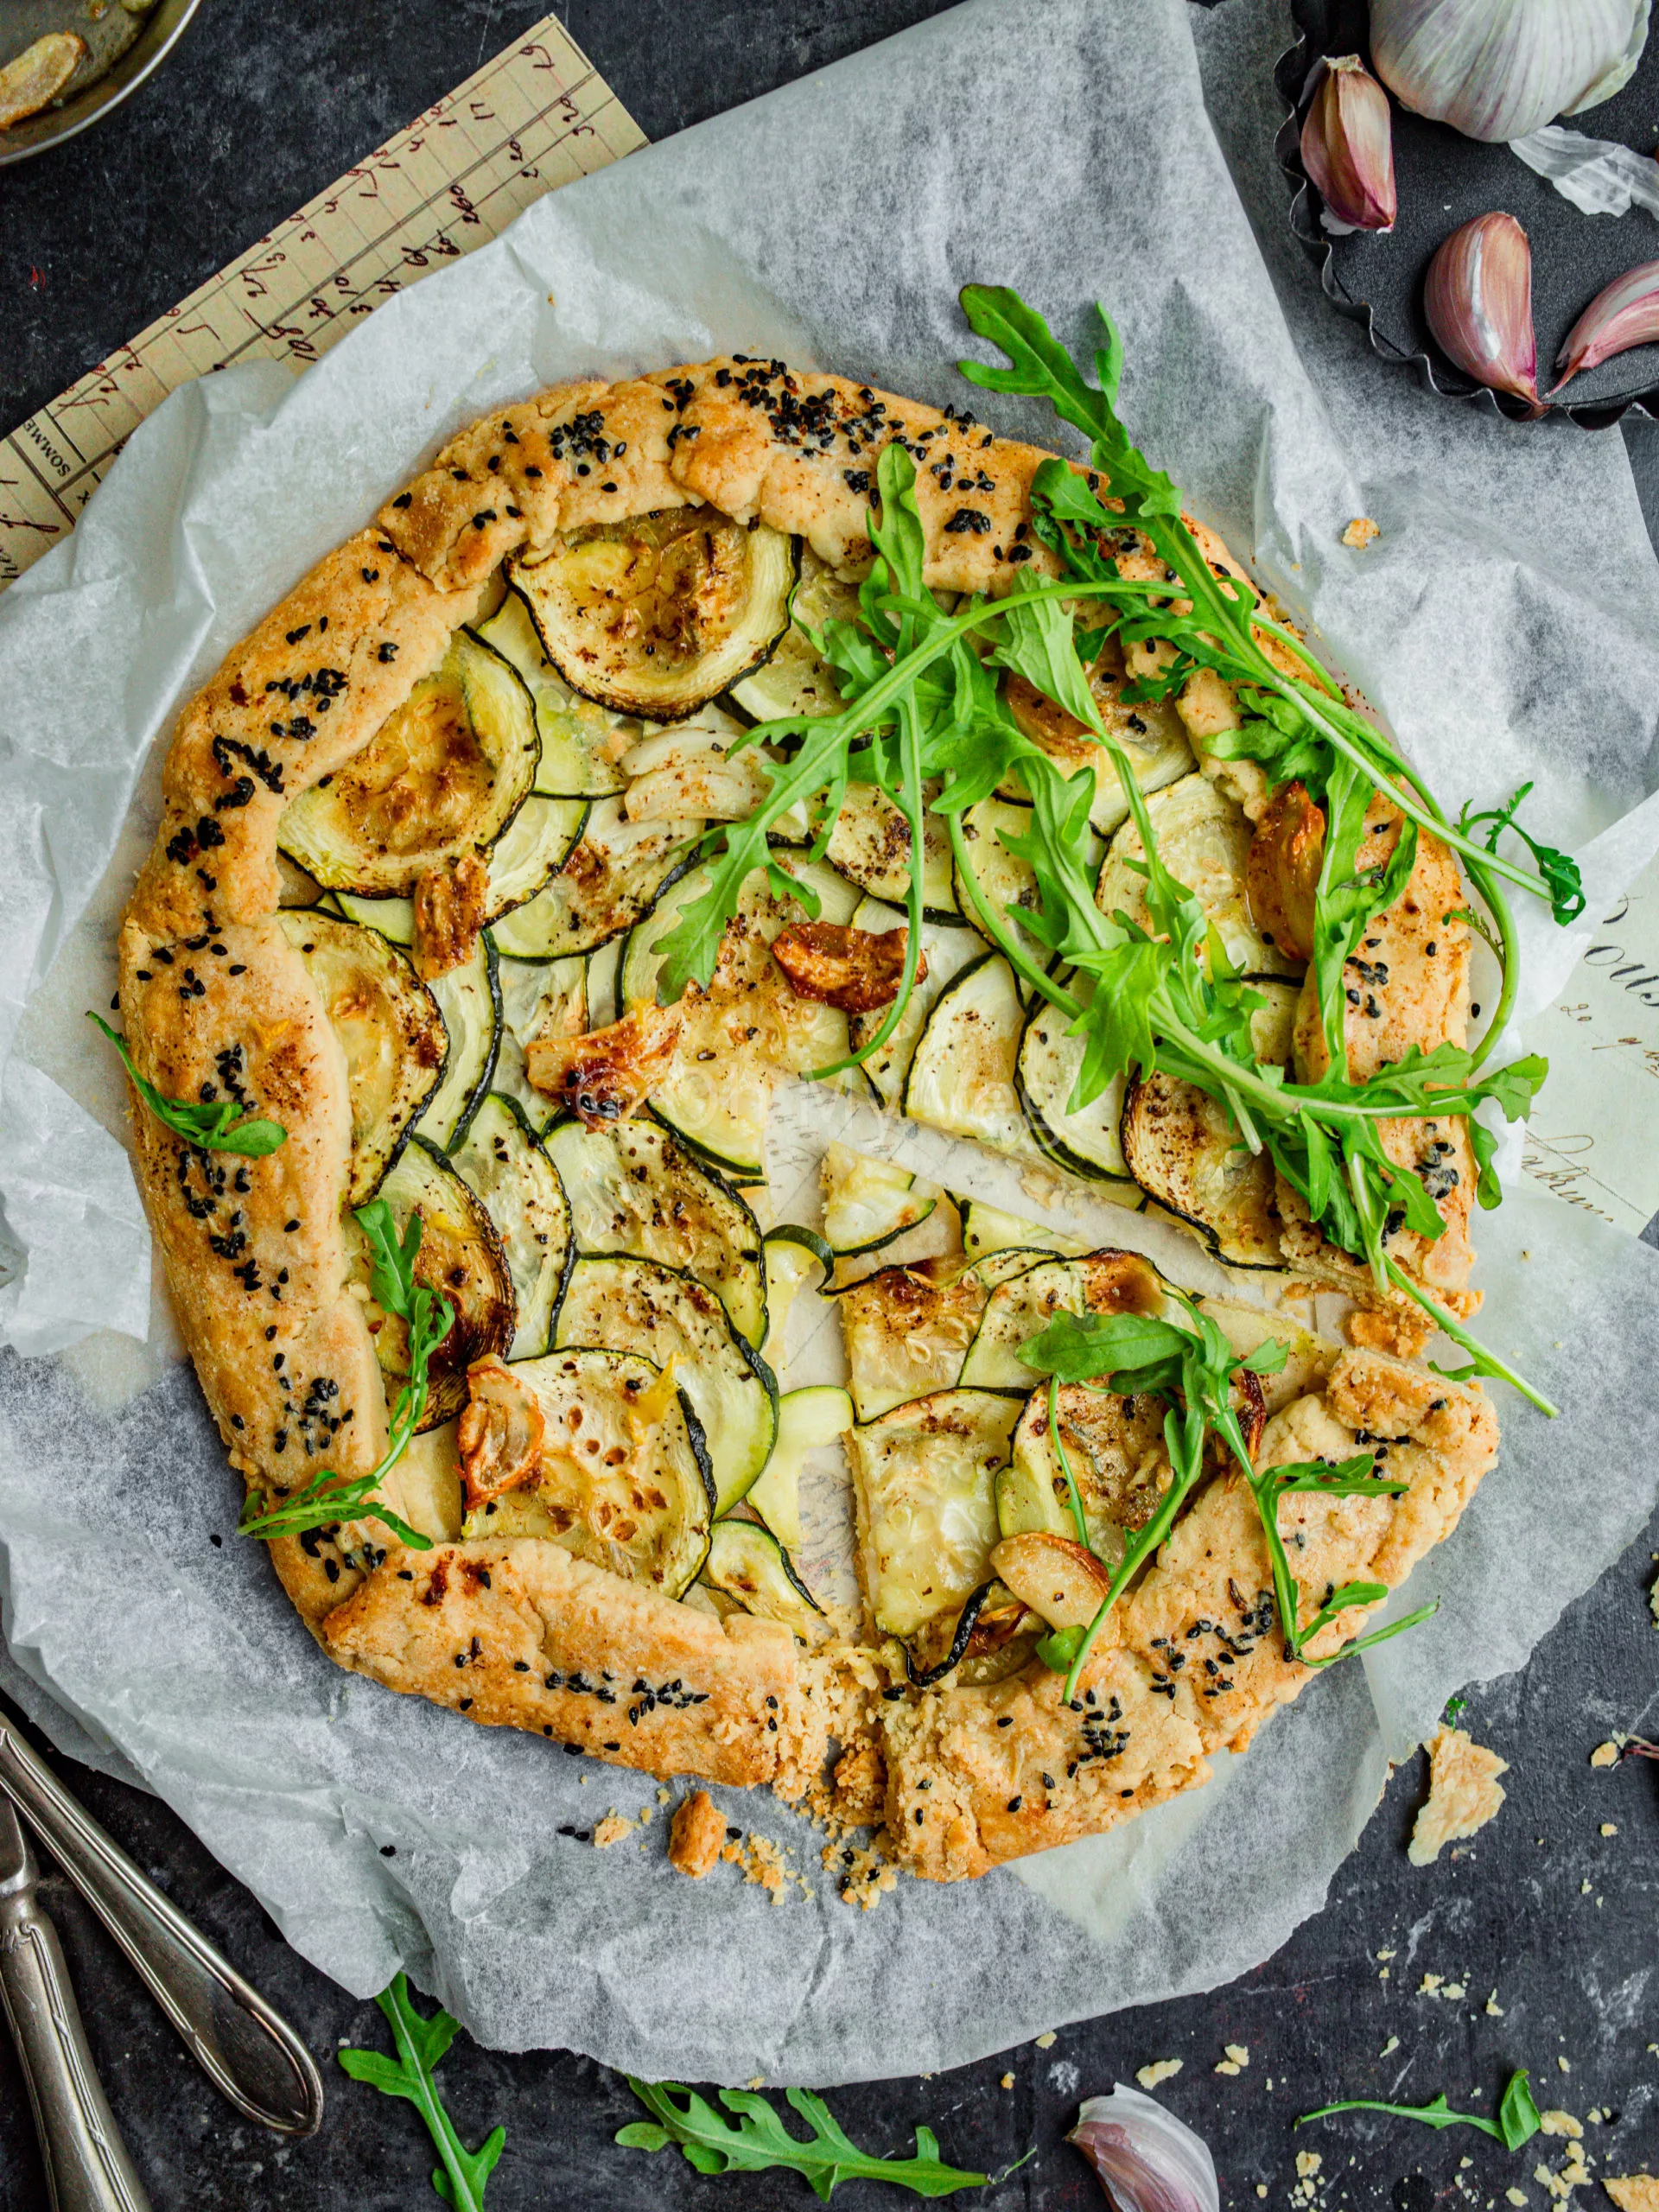 Courgette Galette with Garlic Butter and Feta